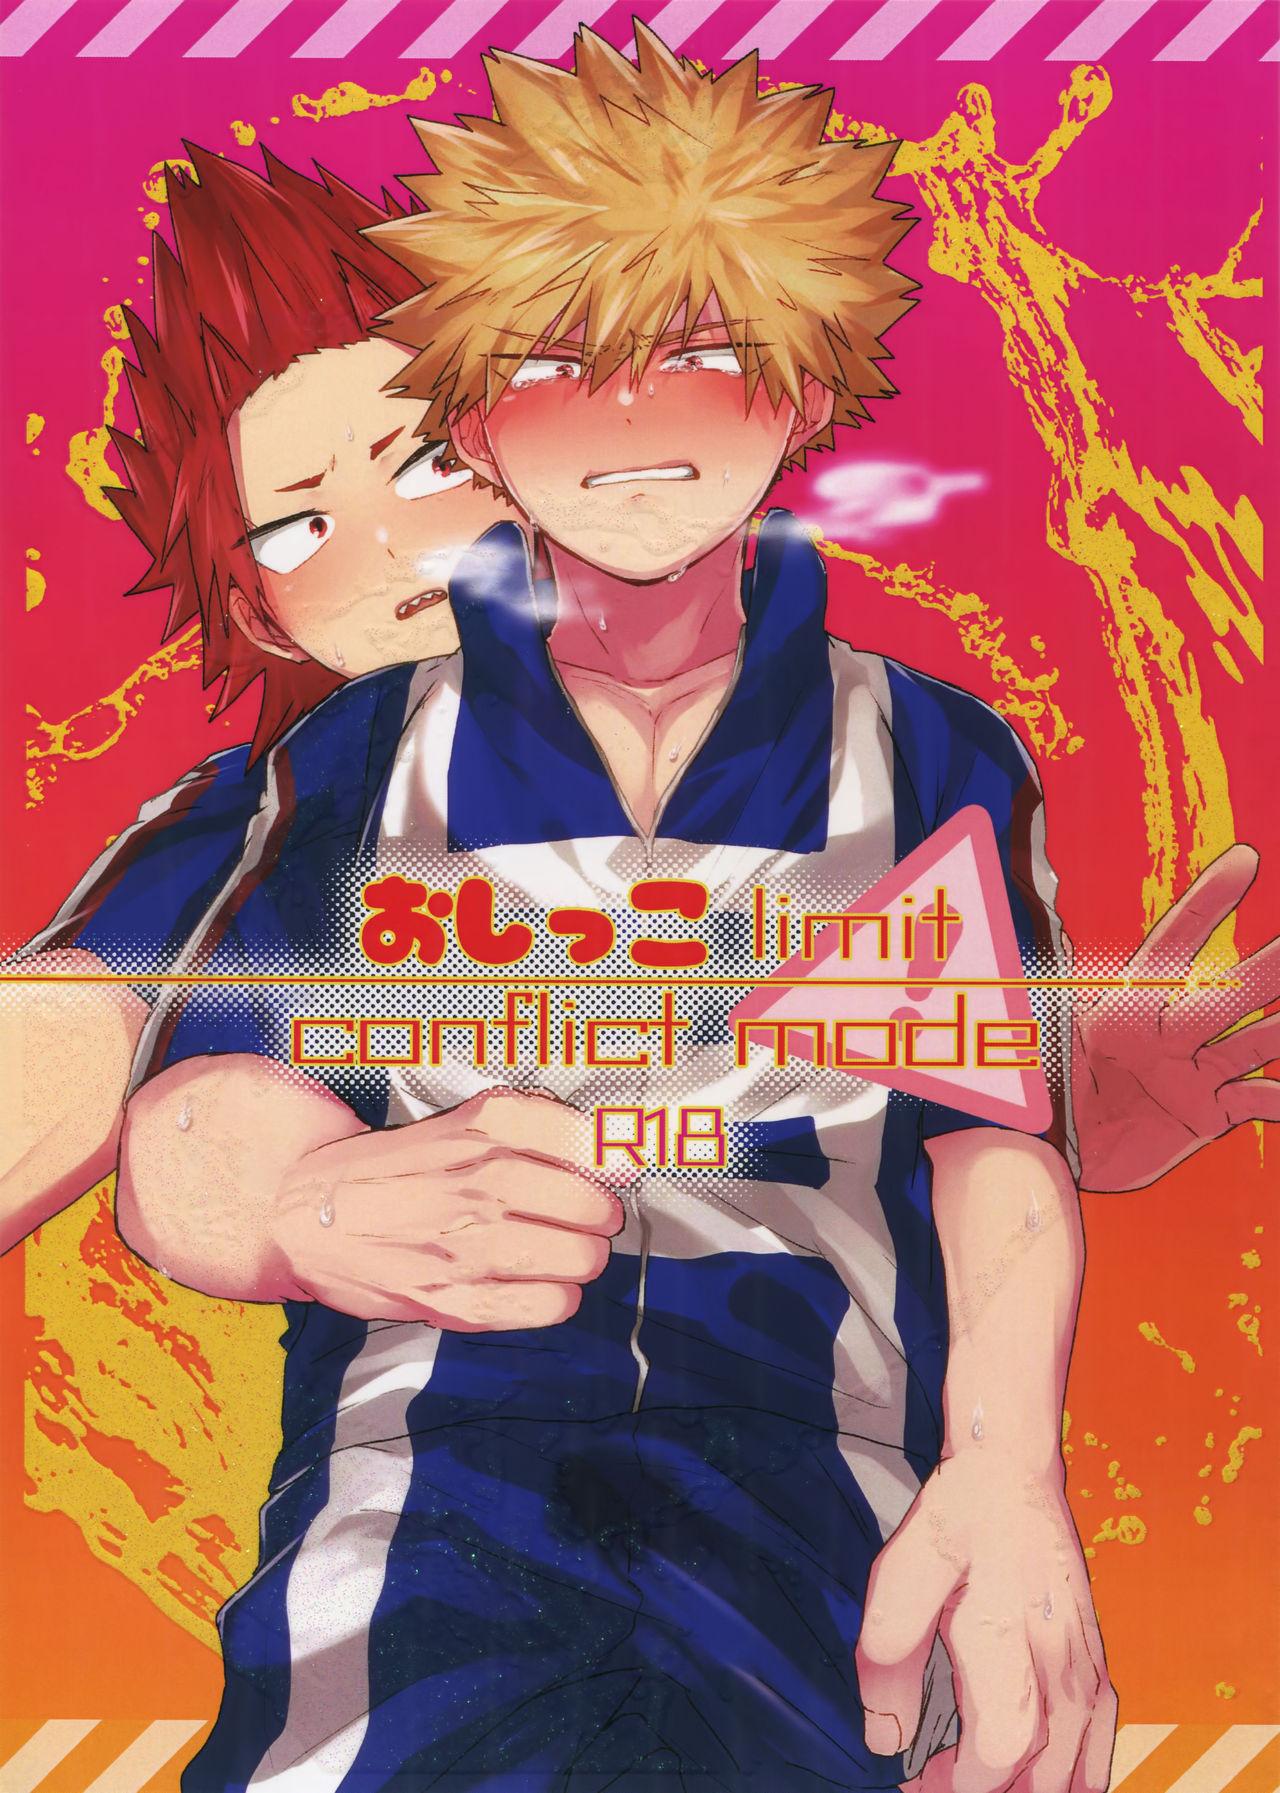 Music Oshikko Limit Conflict Mode - My hero academia Star - Picture 1